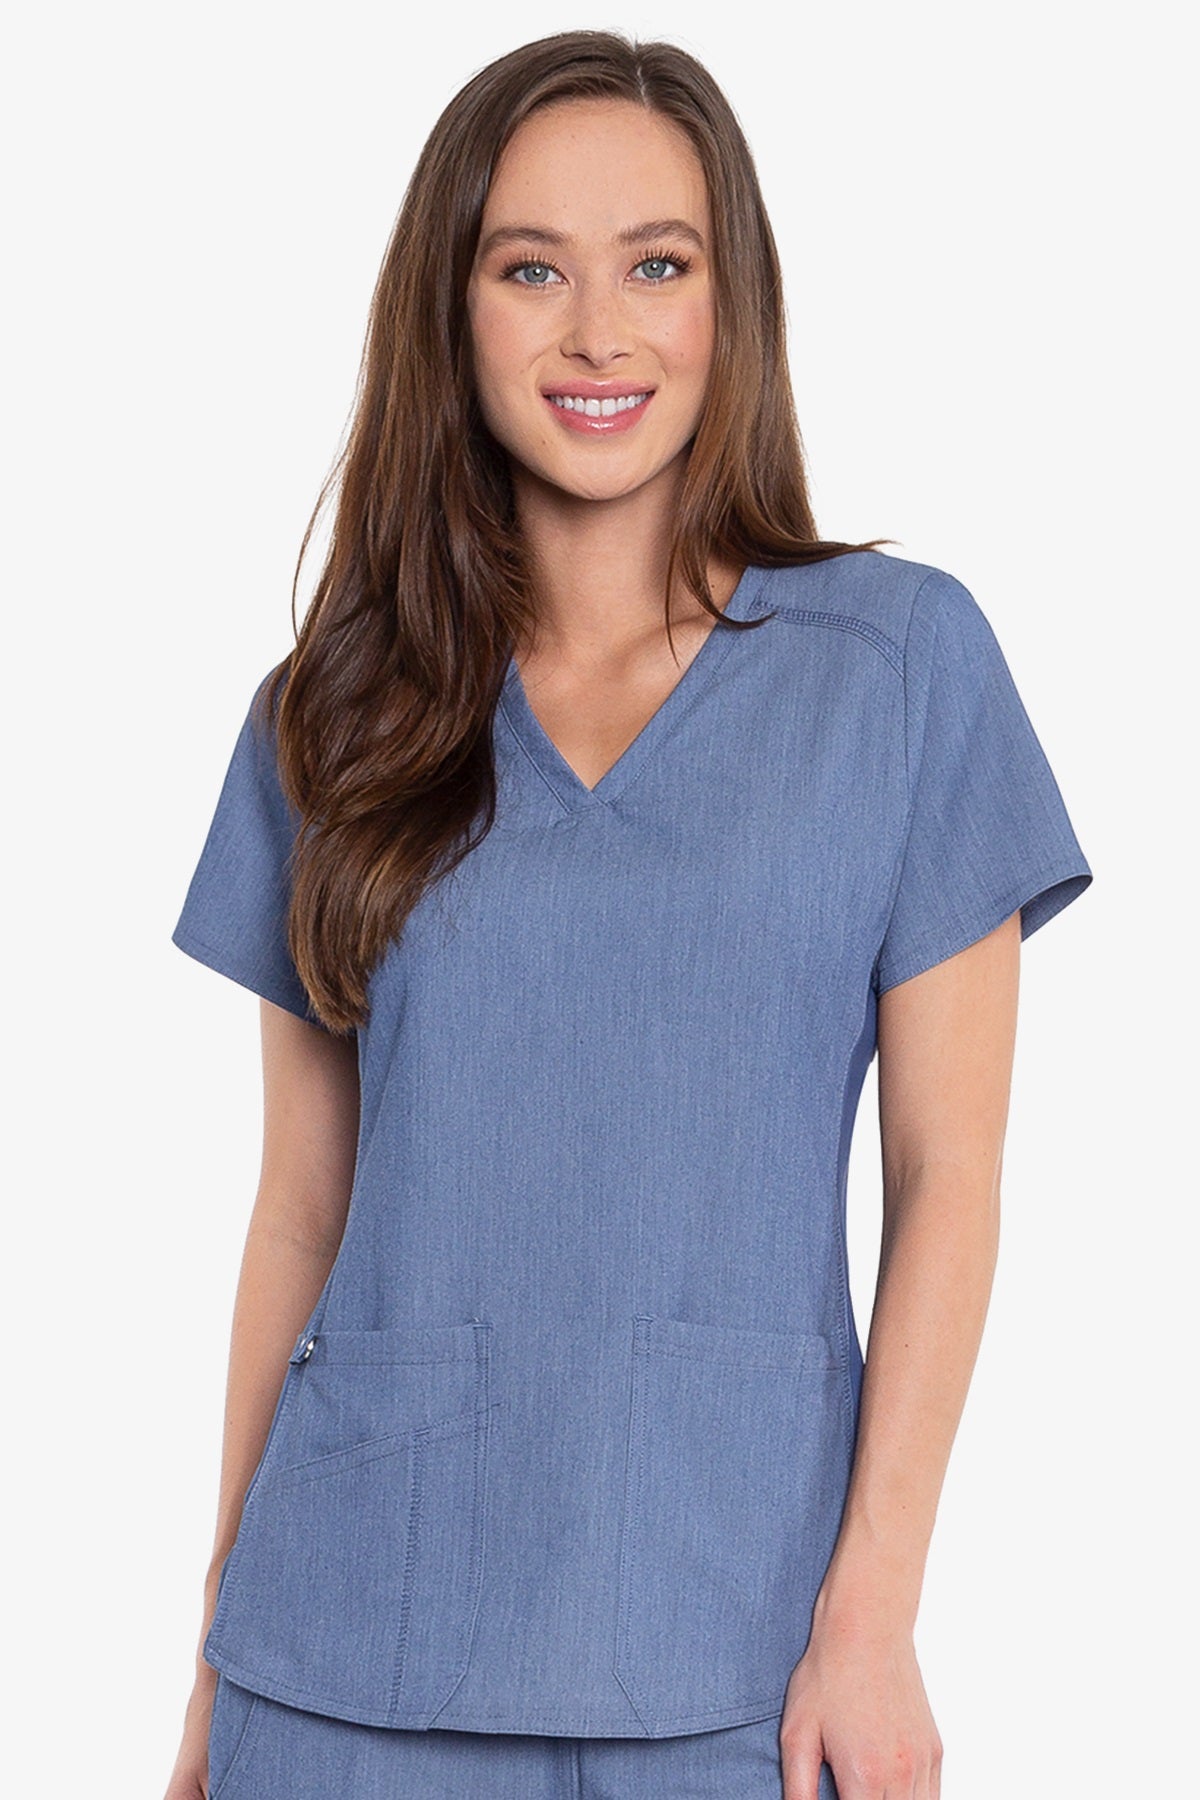 Med Couture Scrub Top Touch Shirttail V-Neck in Blue Heather at Parker's Clothing and Shoes.